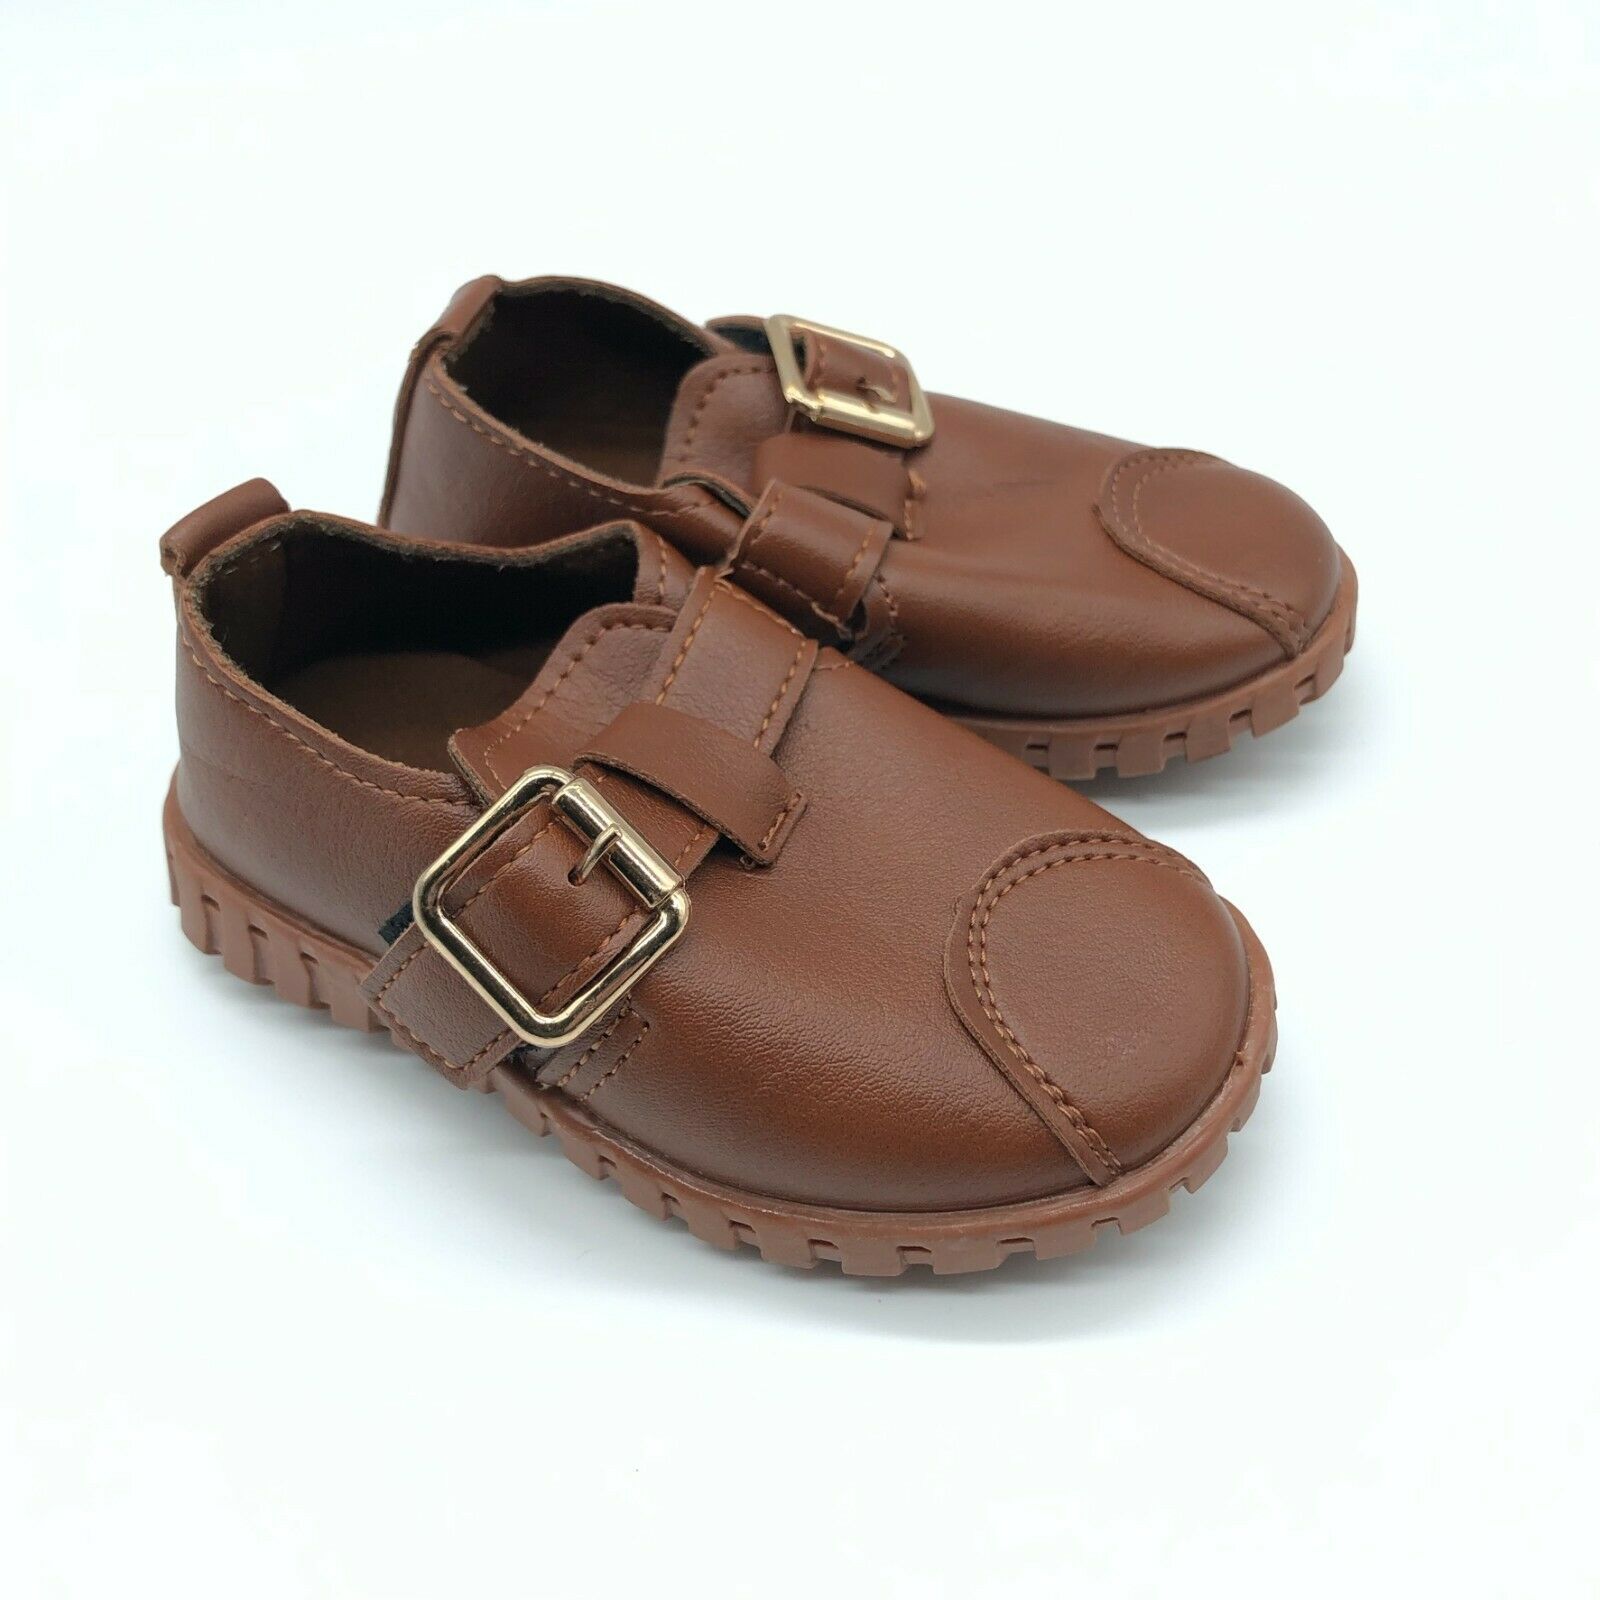 Toddler Boys Dress Shoes Loafers Buckle Faux Leather Hook & Loop Brown 21 US 5.5